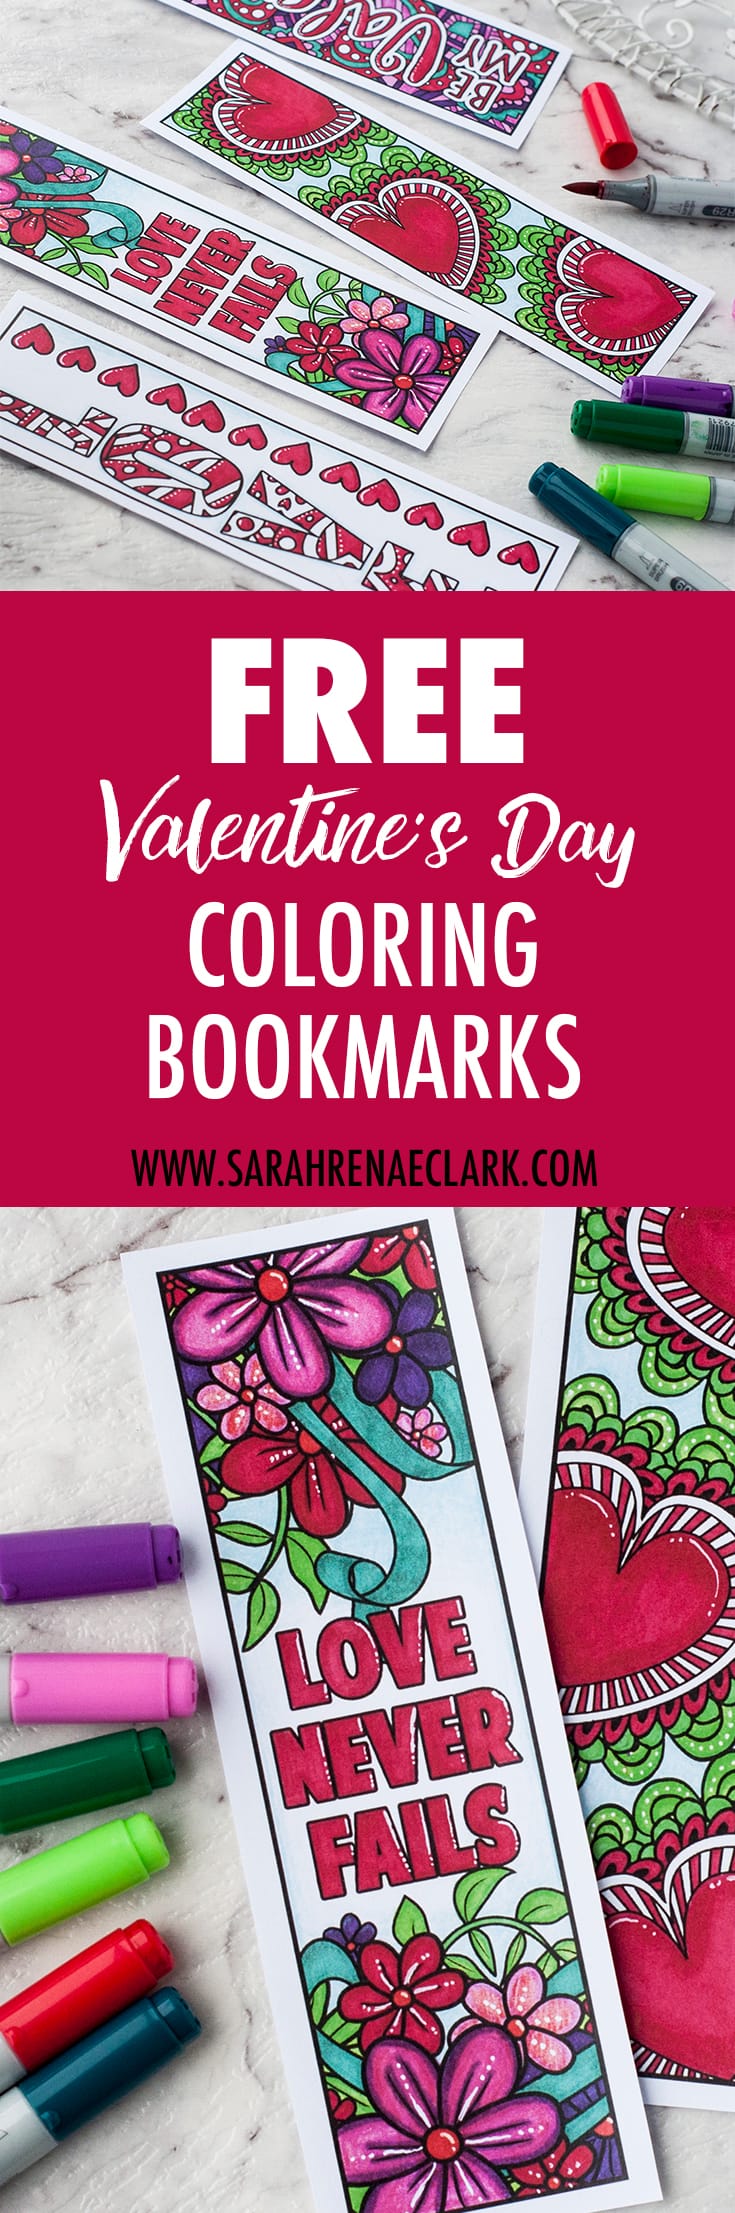 Free printable Valentine #39 s Day coloring bookmarks